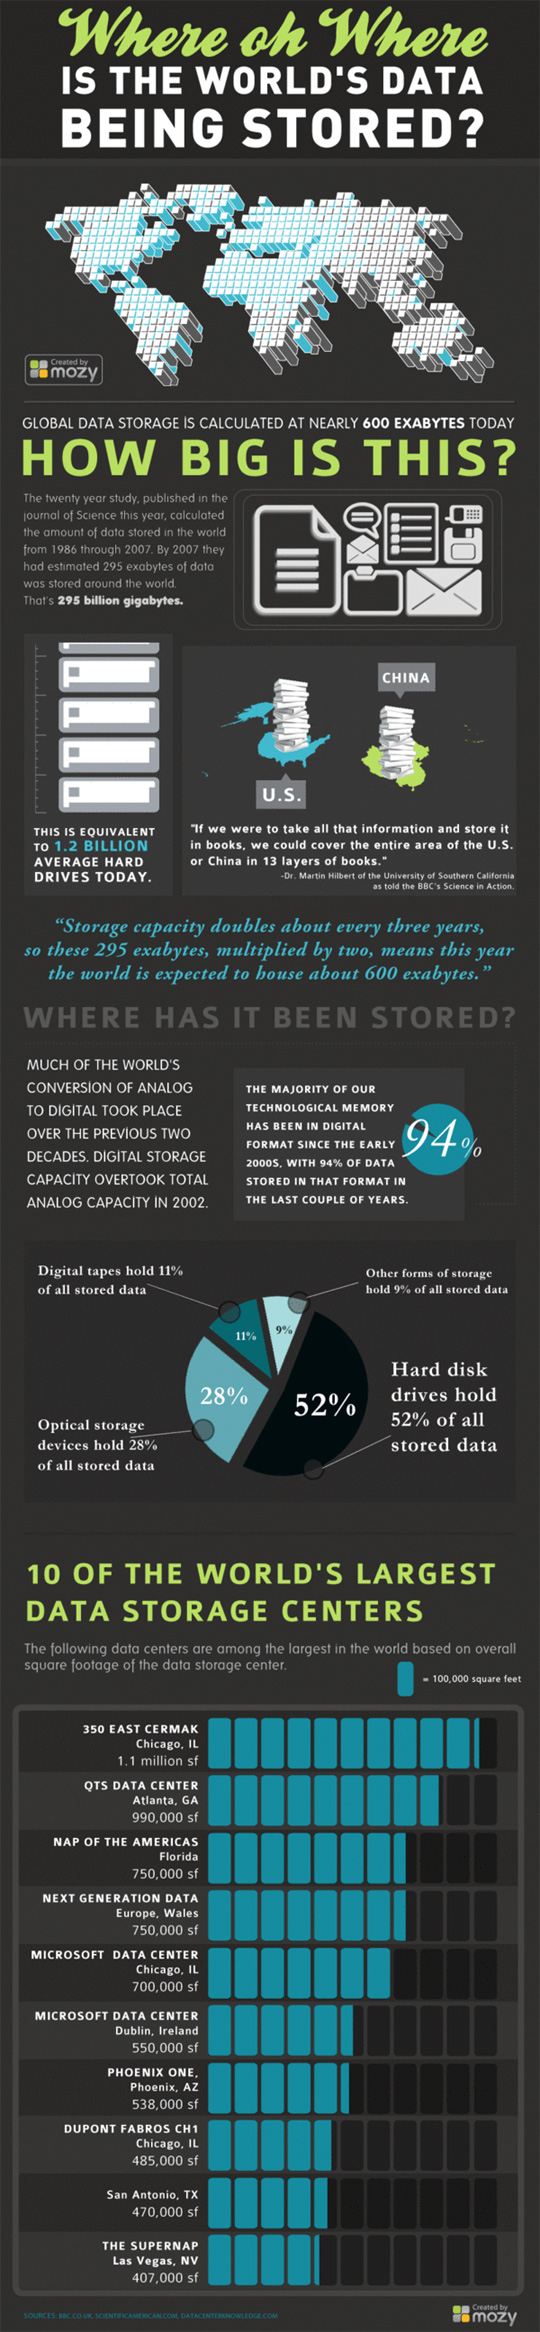 Where Oh Where: Current State Of World's Data Storage (Infographic) 12